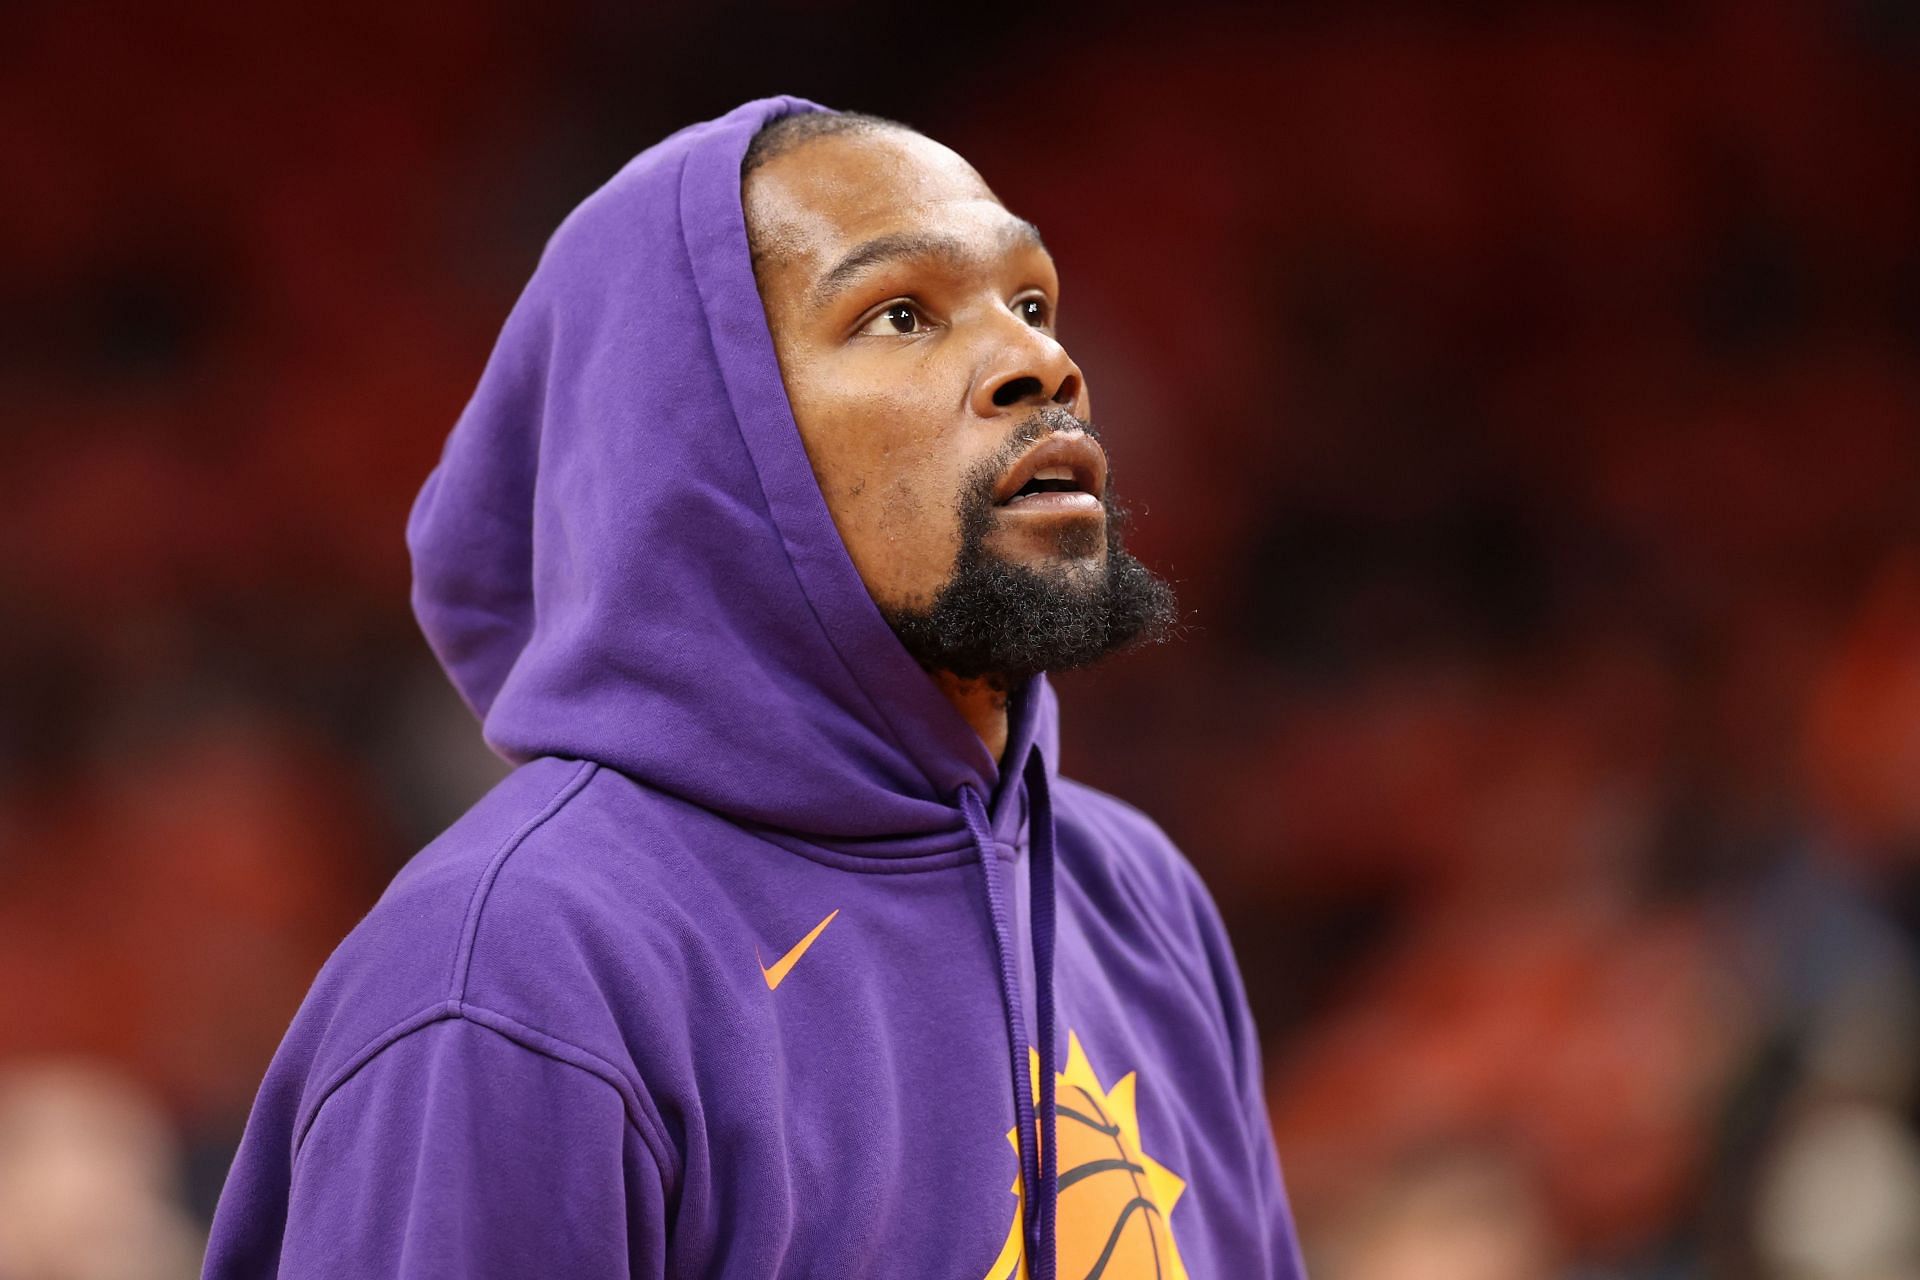 Is Kevin Durant Married? Does KD Have Kids? - The SportsRush